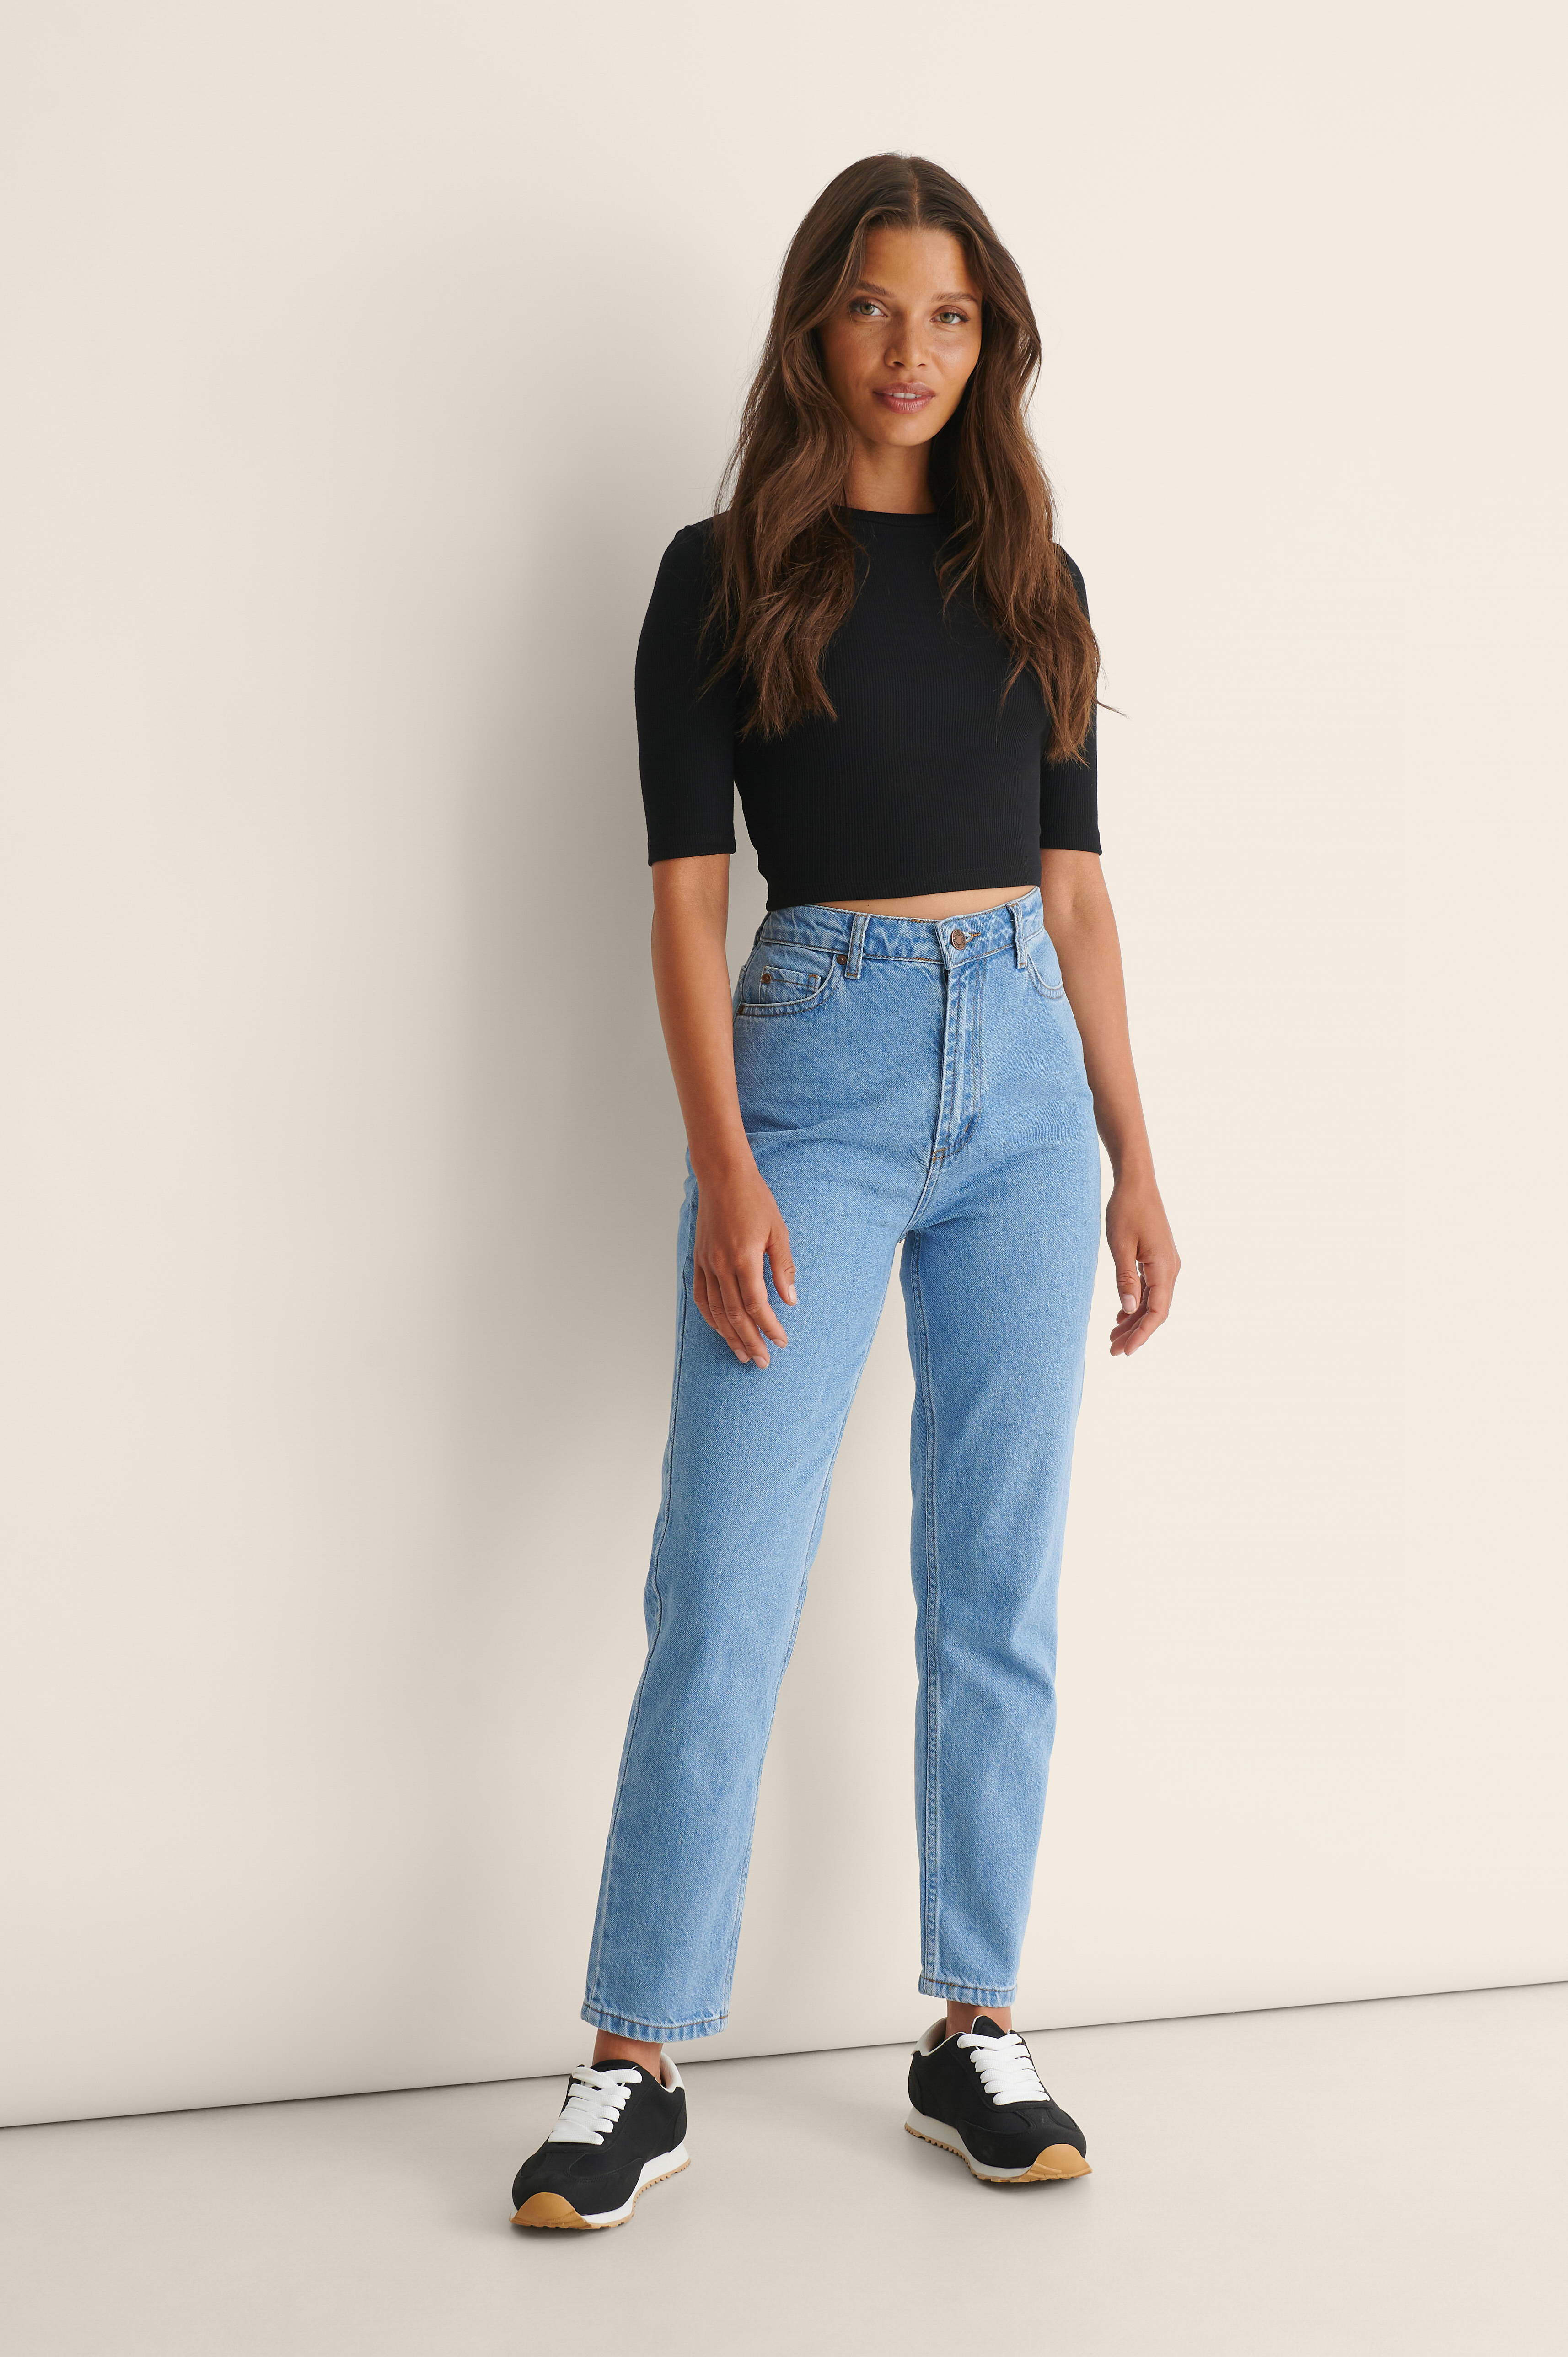 High Waist Mom Jeans Outfit.